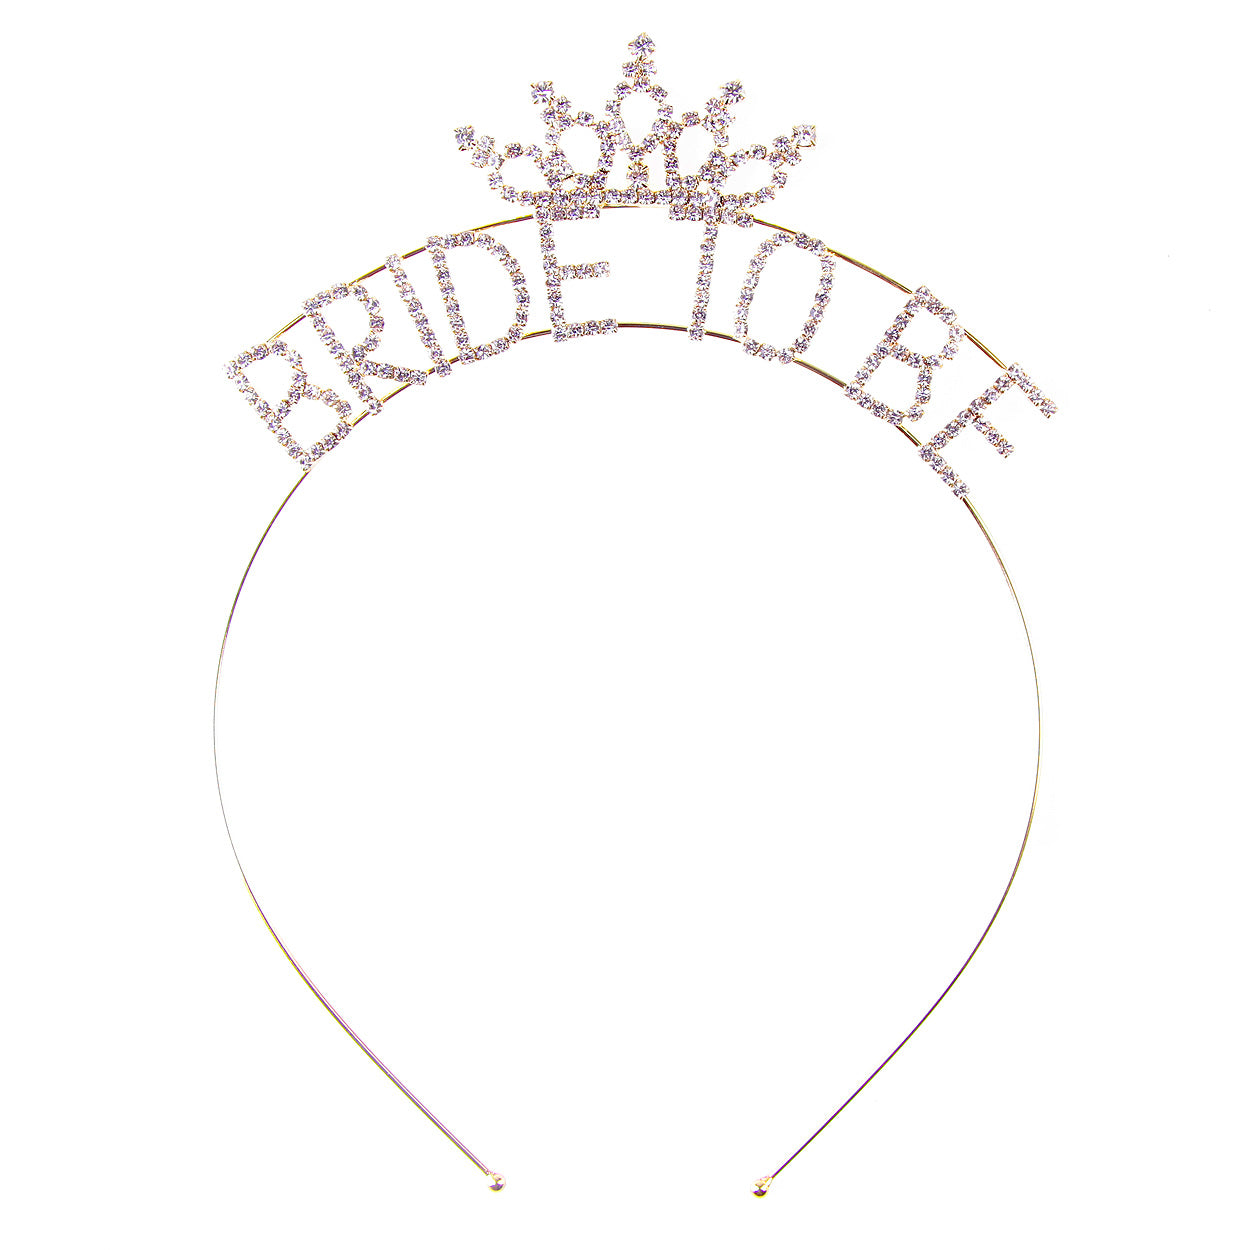 Bride To Be Headband in Gold - Bachelorette Party Headband